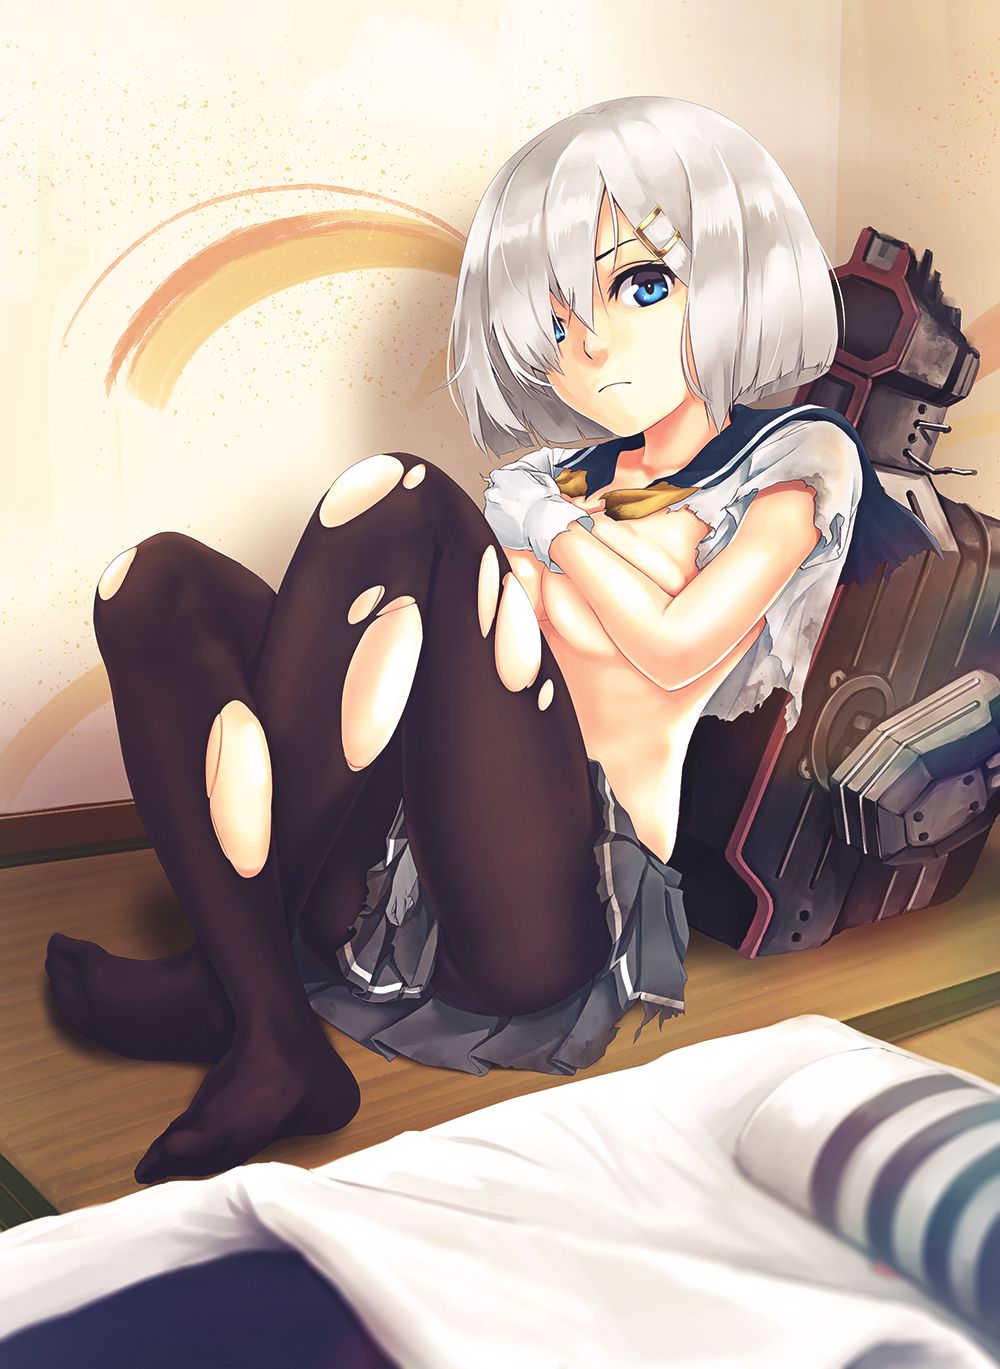 Destroyer, hamakaze-Chan hentai images collected. Vol.1 20